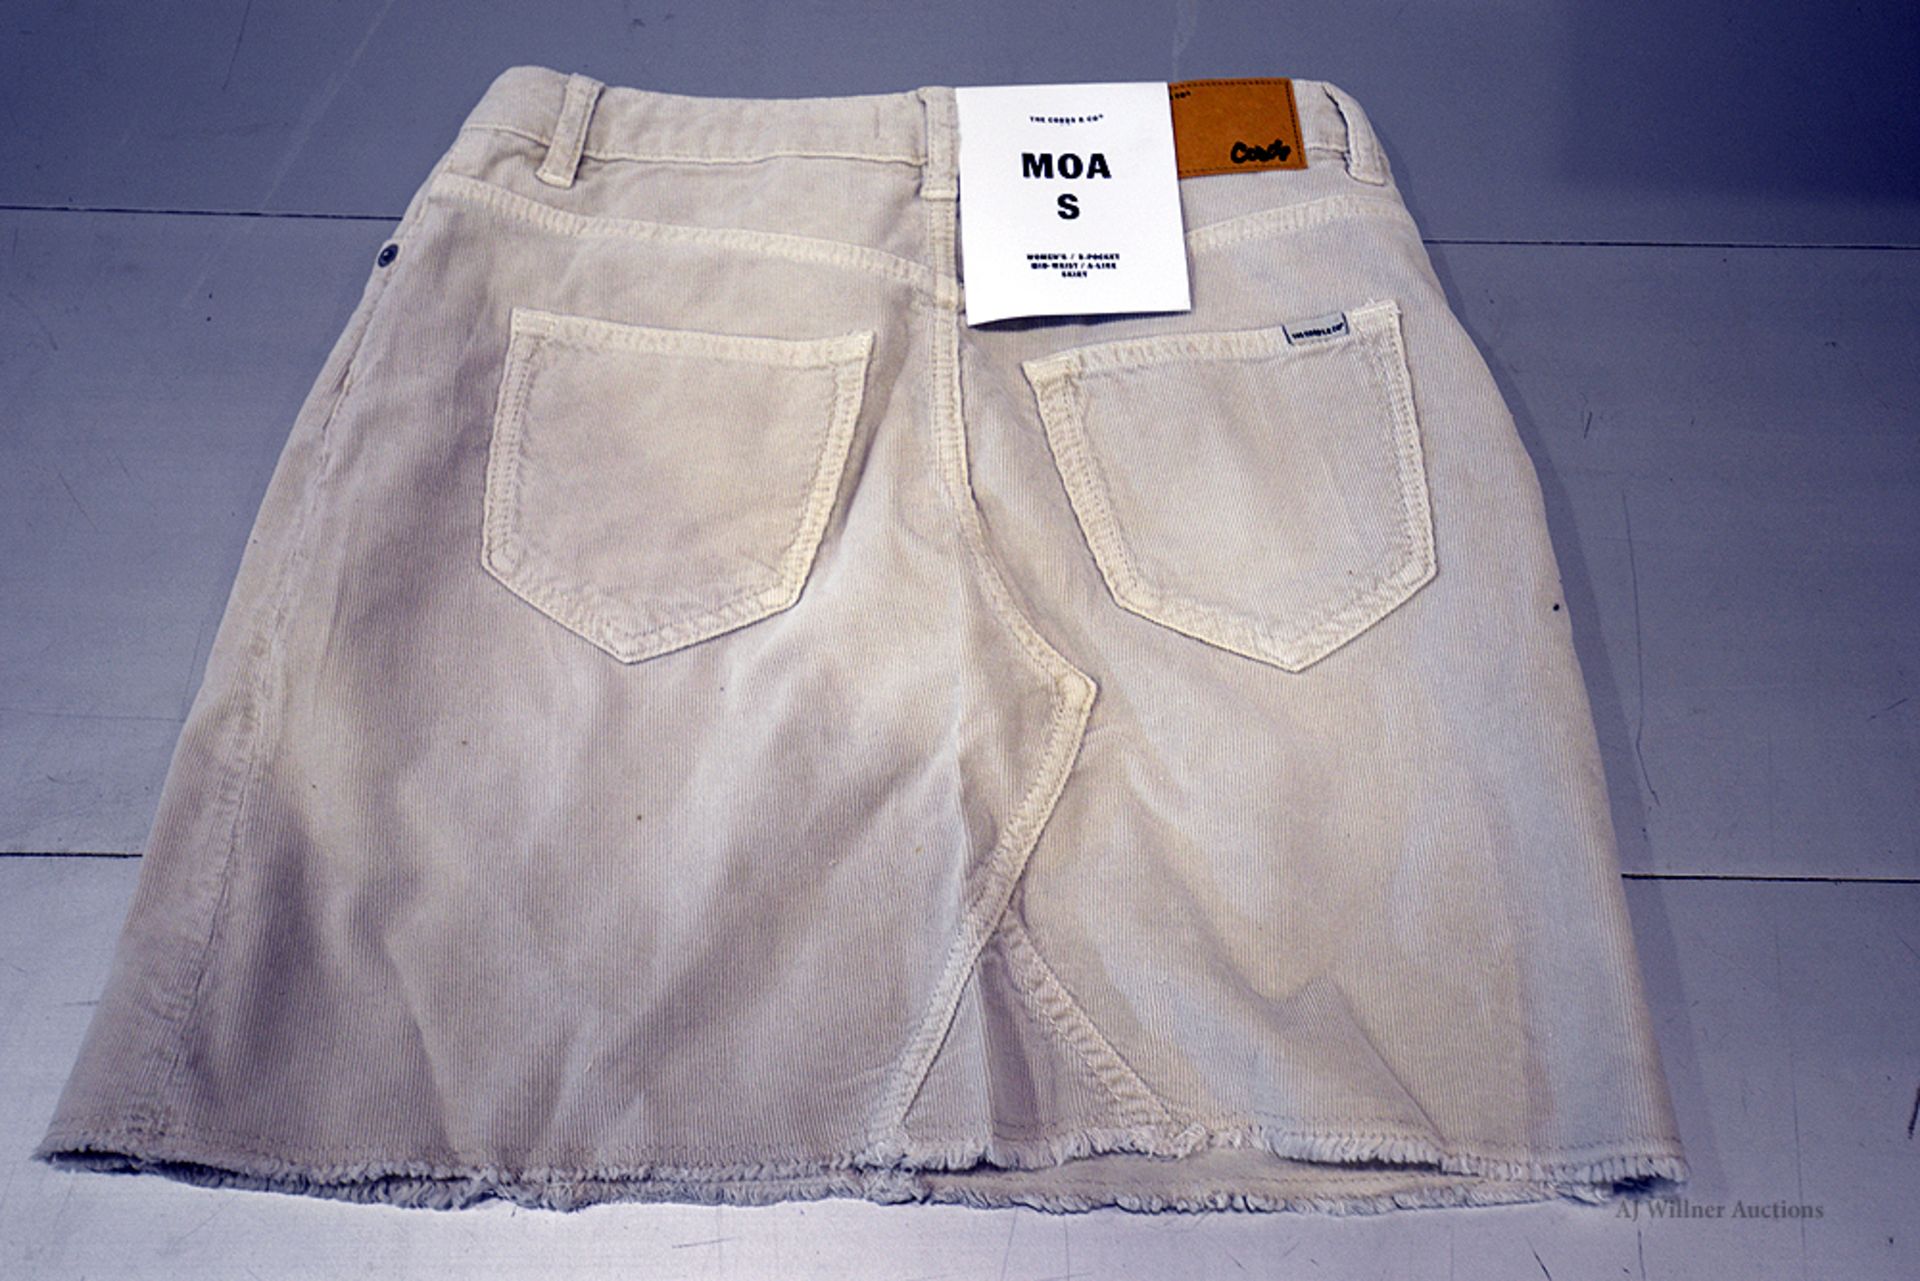 The Cords & Co. "Moa" Women's/ 5-Pocket/ Mid Waist/ A-Line Skirts MSRP $120 - Image 3 of 5